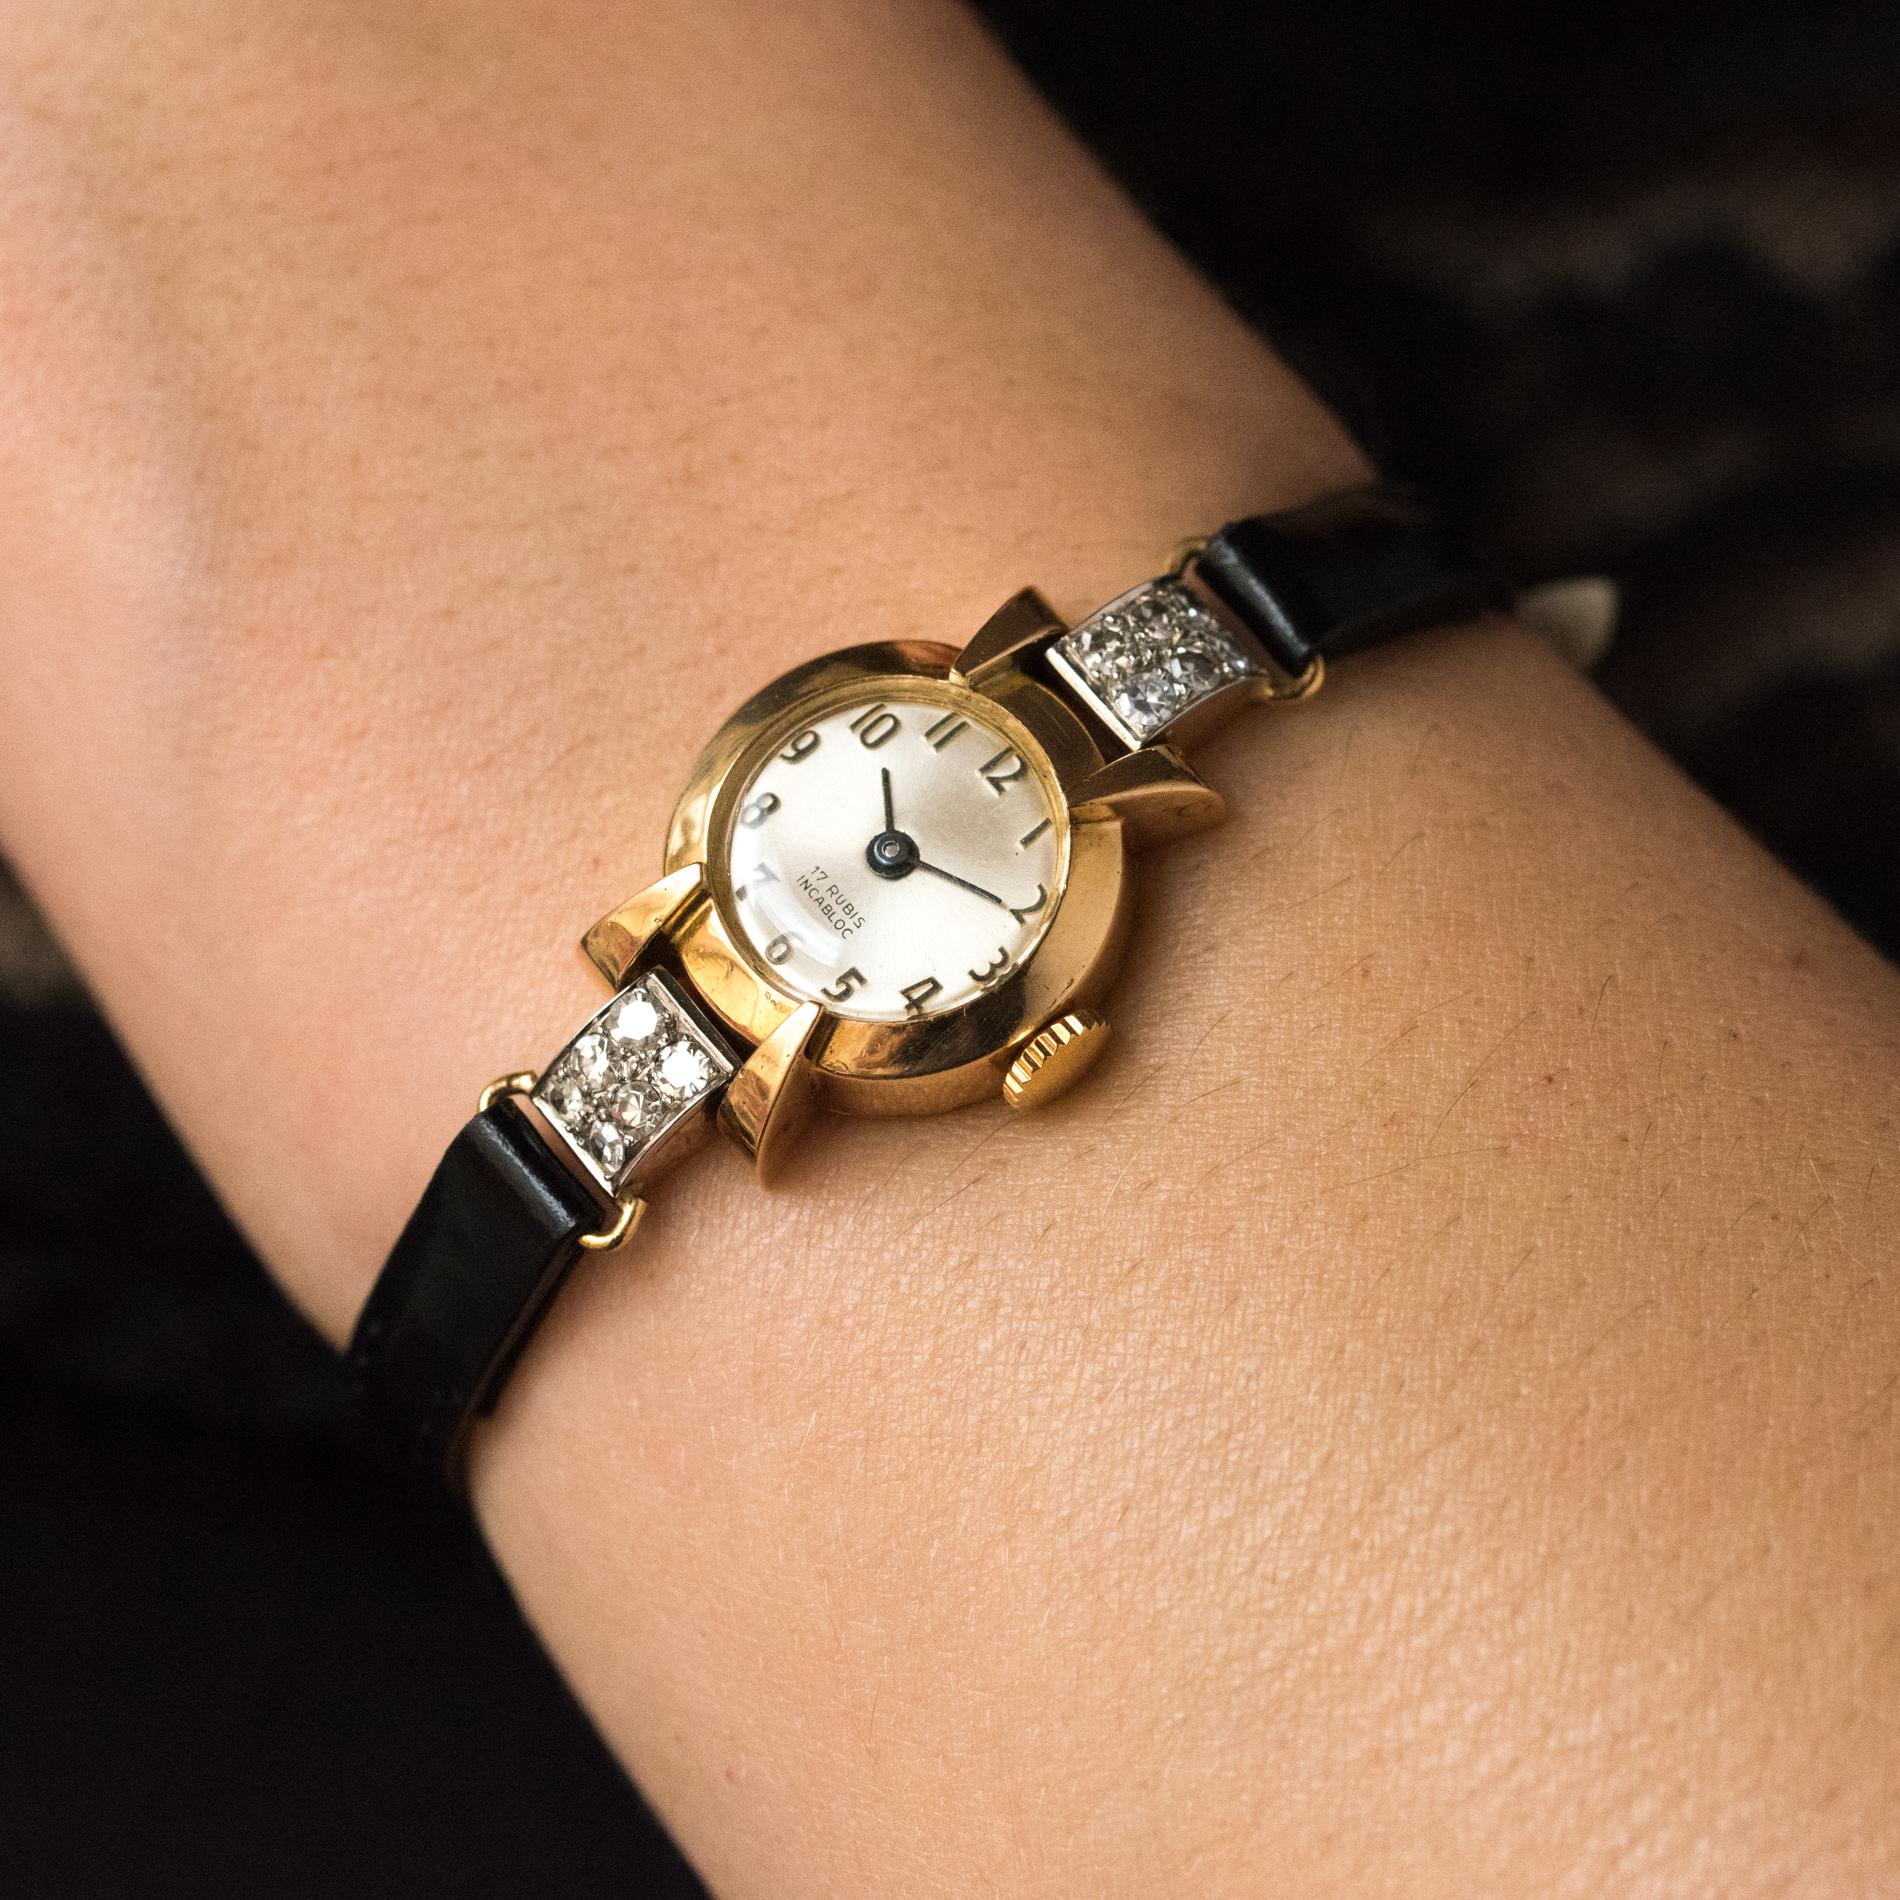 Lady's watch.
Case in 18 karats yellow gold, eagle's head hallmark, and its 2 domed rectangular motifs each set with 6 diamonds.
Woman's mechanical watch with manual winding.
Pearl color background.
New bring back bracelet in calf leather.
Mechanism